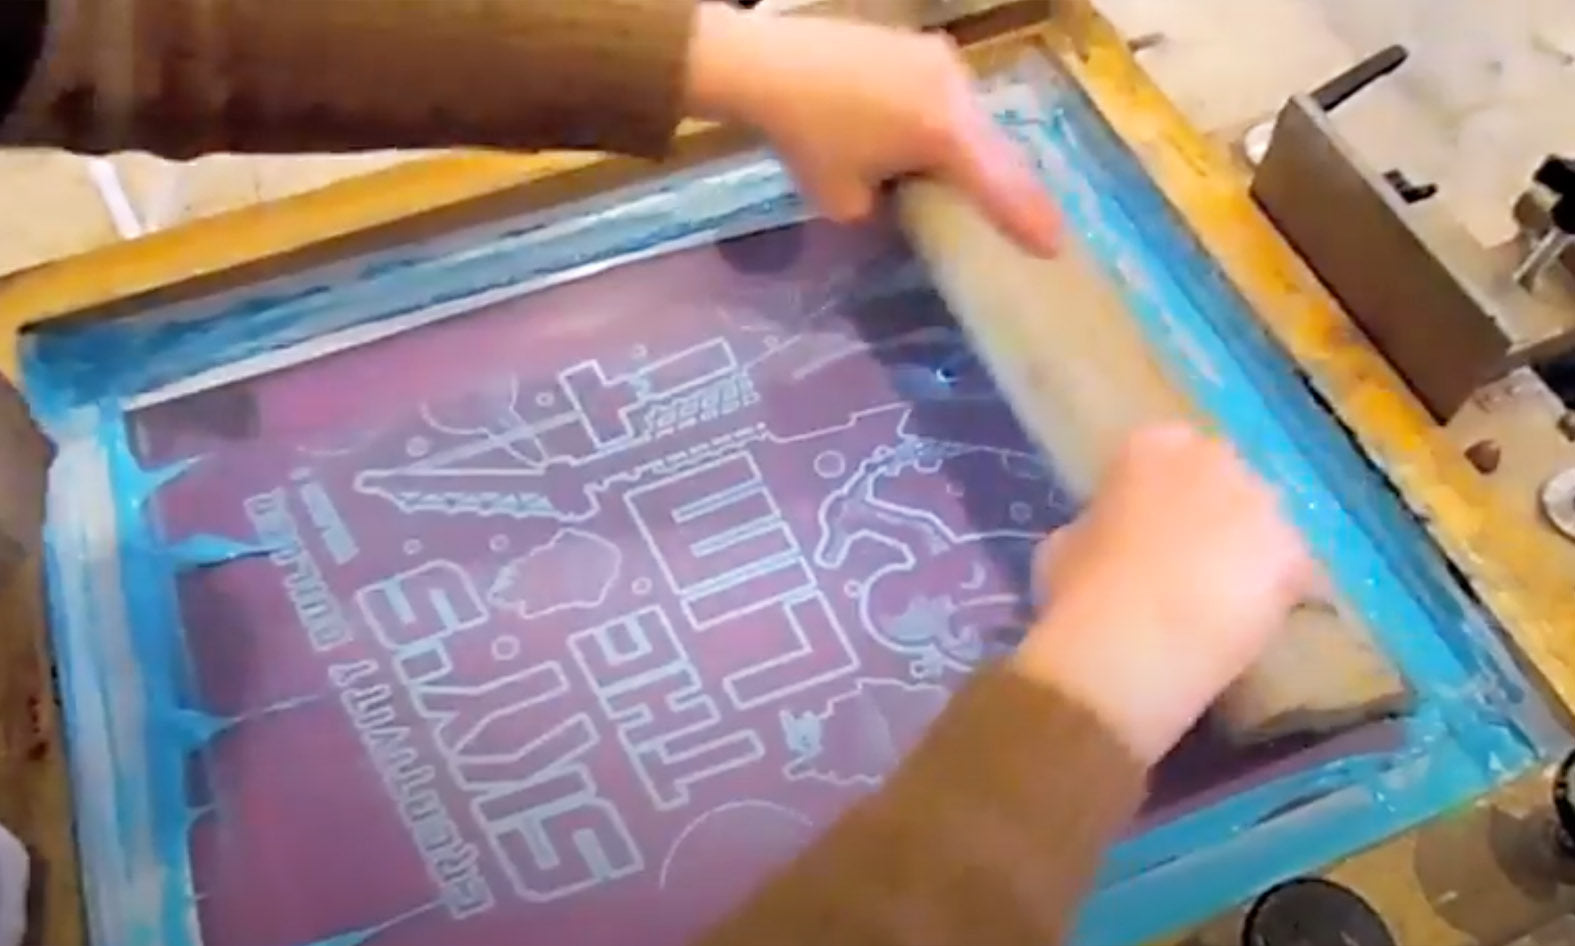 2016: "Sky's the Limit" Book Cover Screen Printing